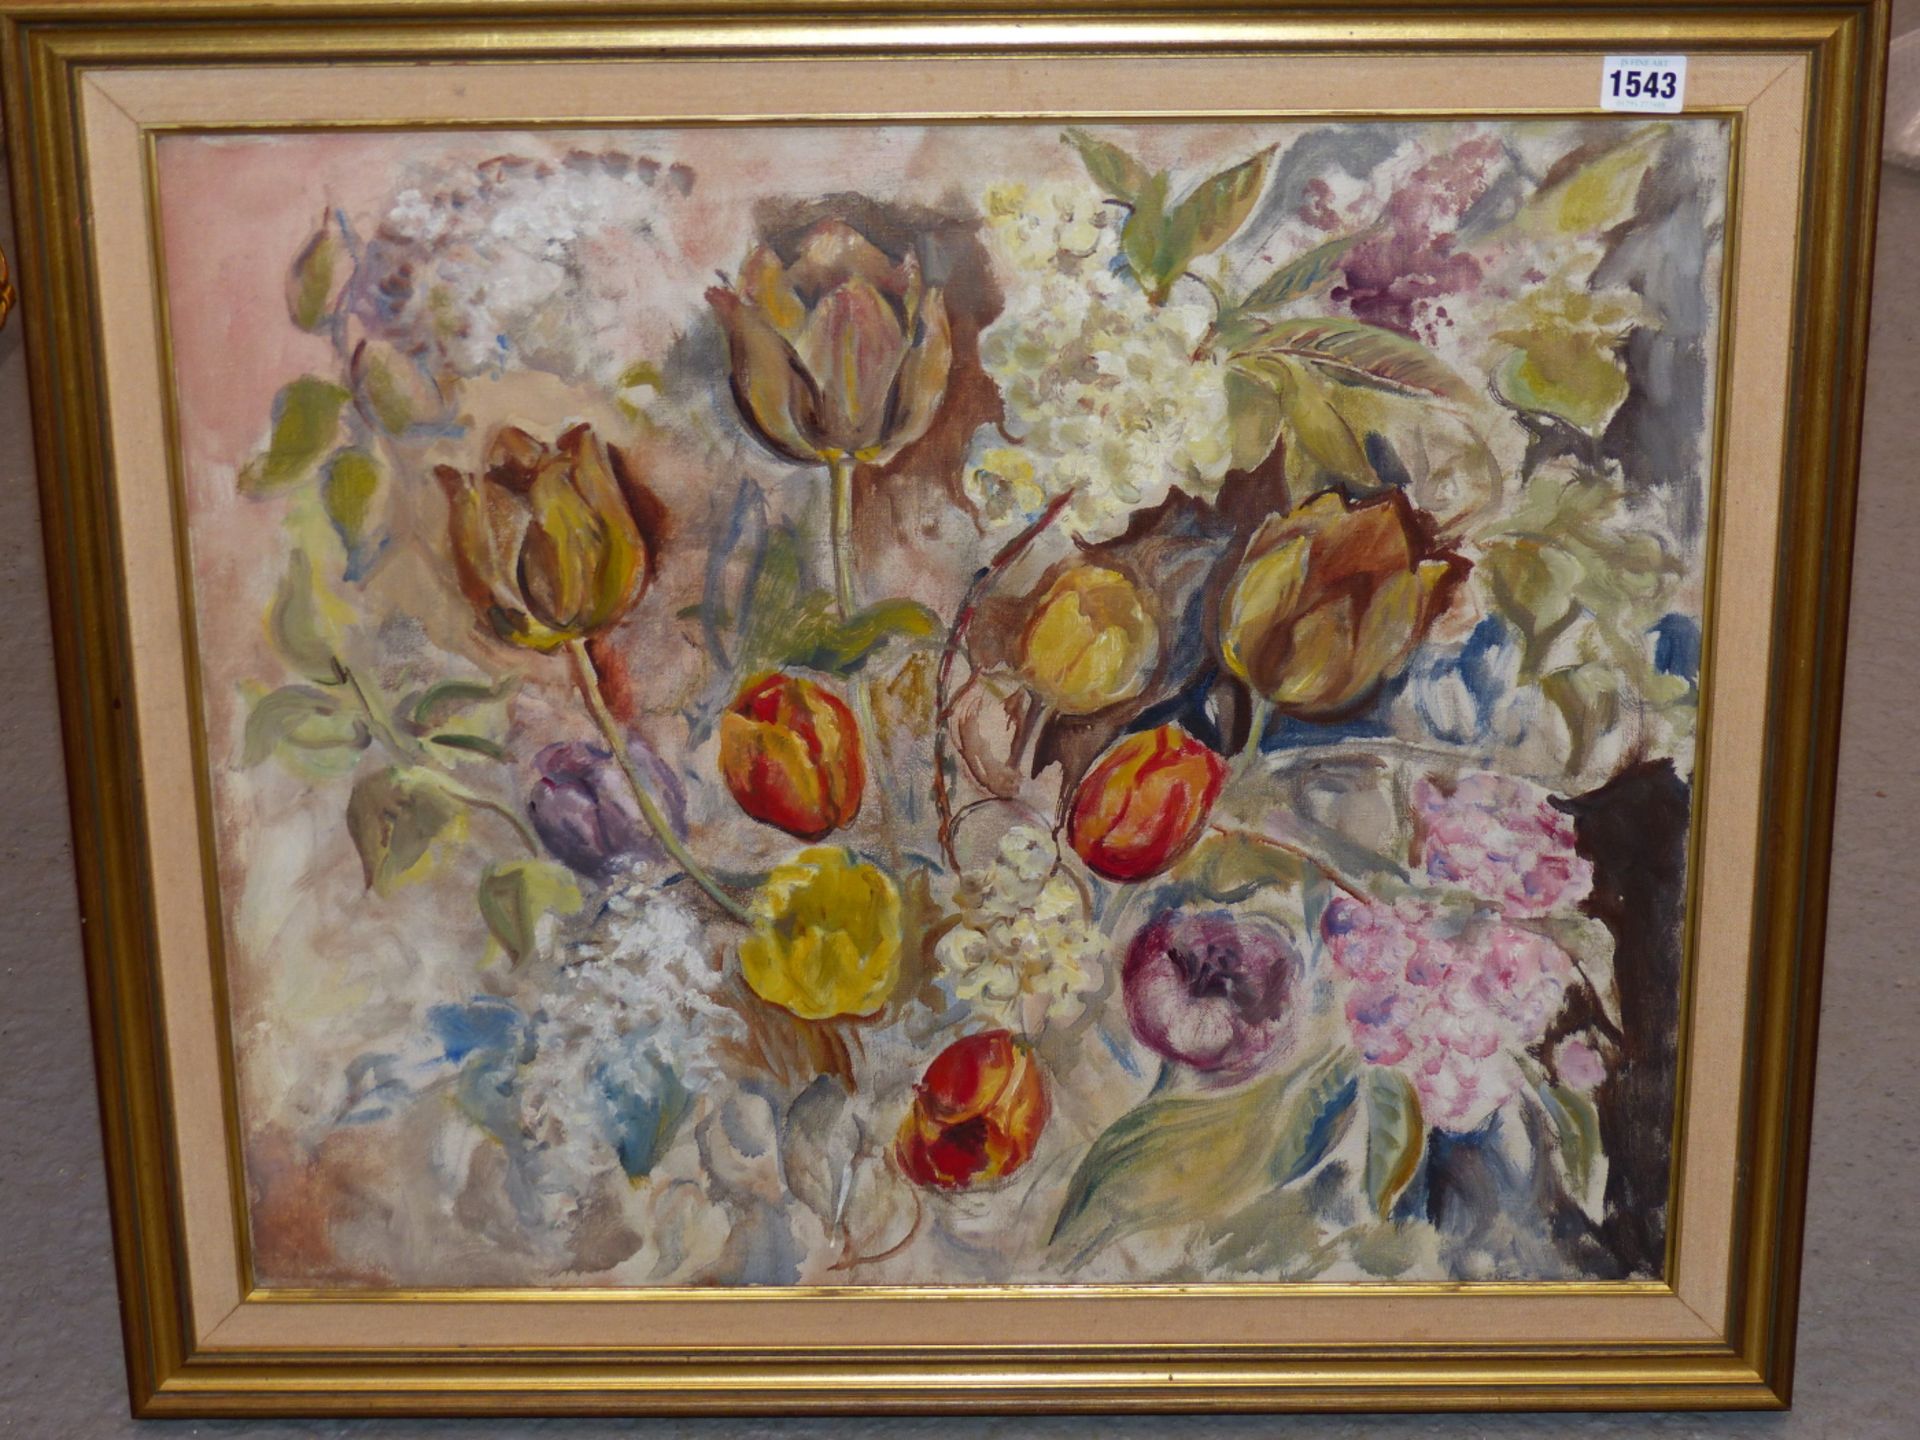 20TH CENTURY SCHOOL. STUDY OF TULIPS AND OTHER FLOWER , OIL ON CANVAS. SIGNED INDISTINCTLY L/R. 60 X - Image 2 of 3